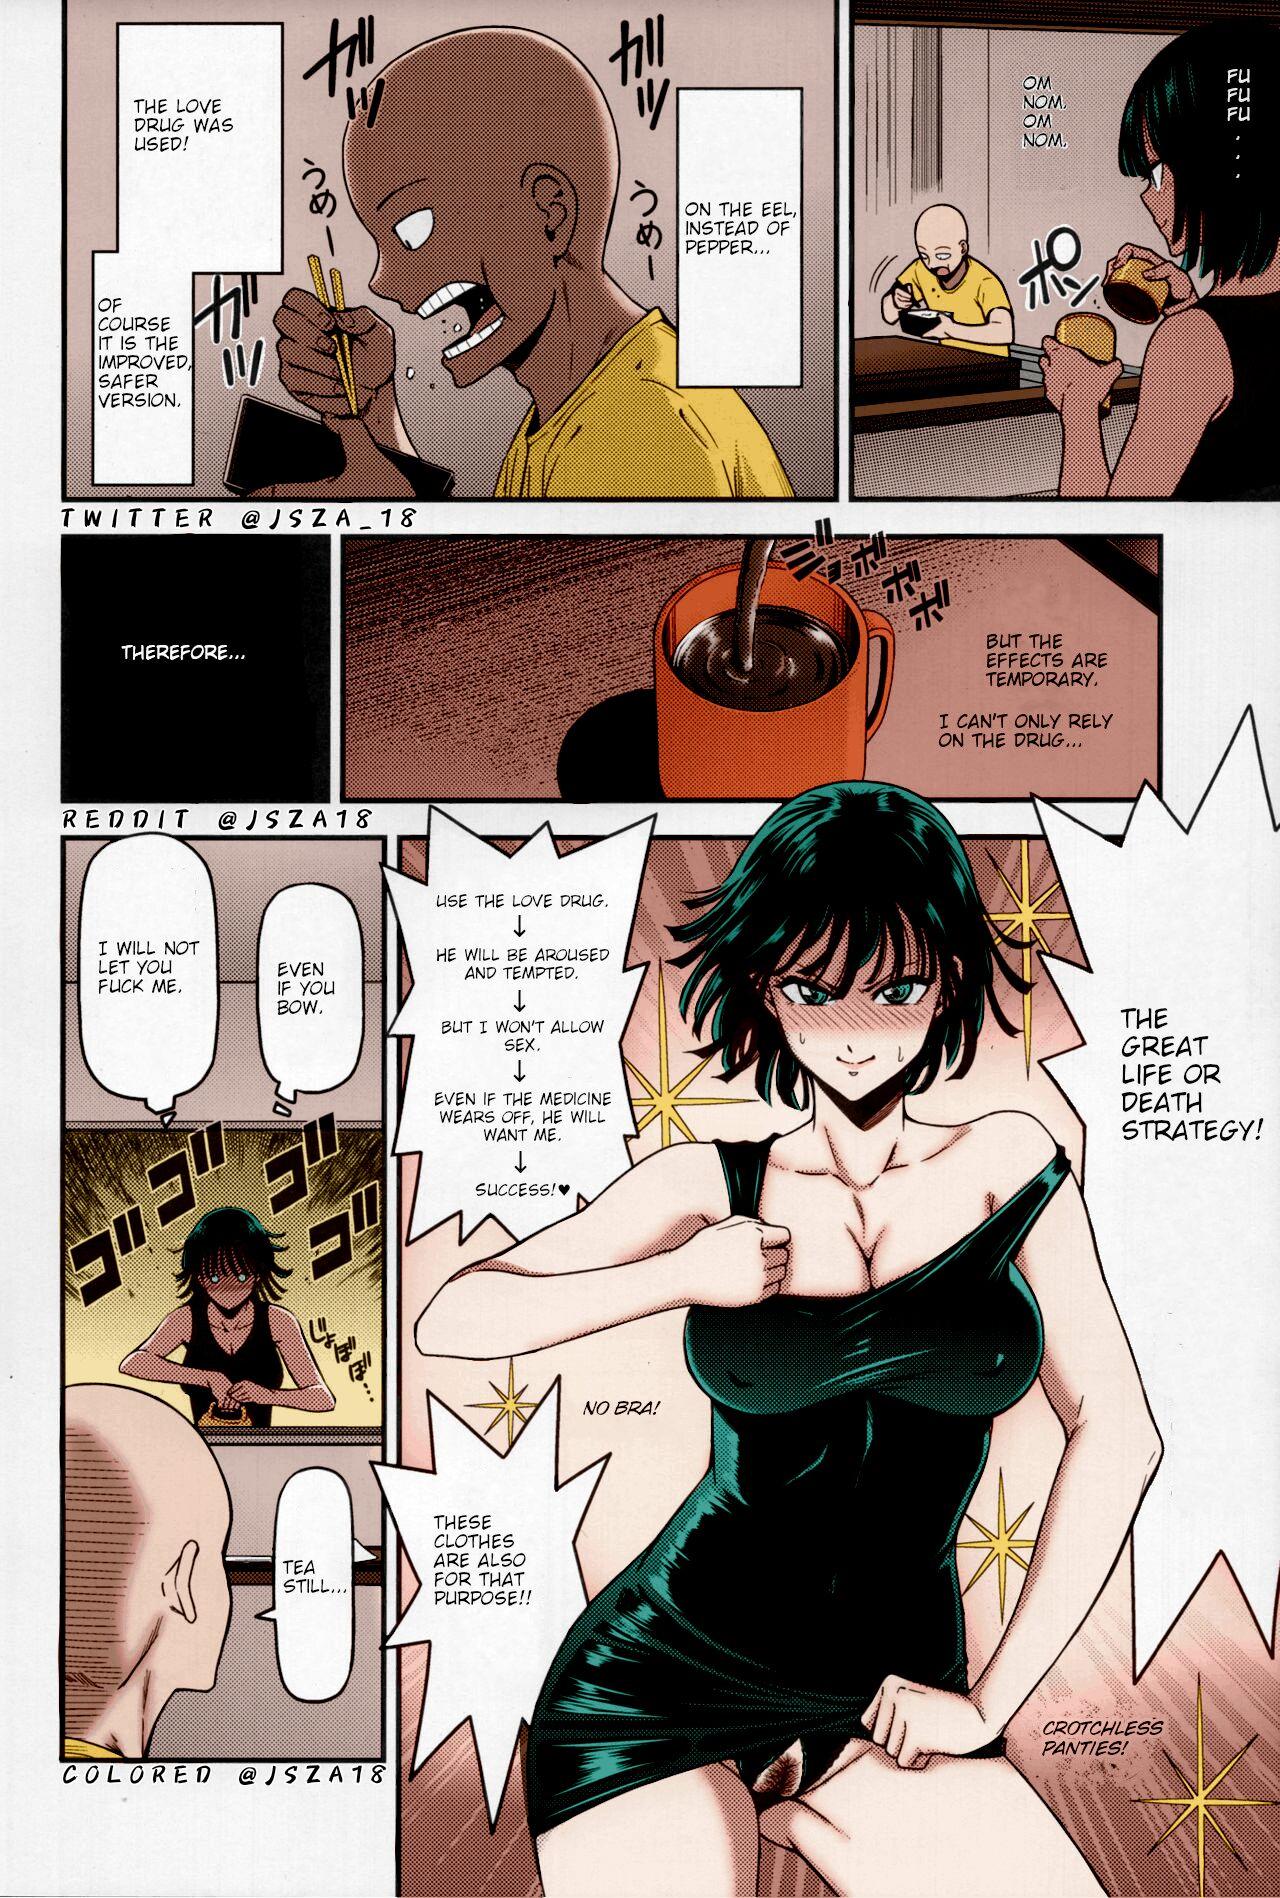 Amateurs Gone ONE-HURRICANE 6 - One punch man Joi - Page 5